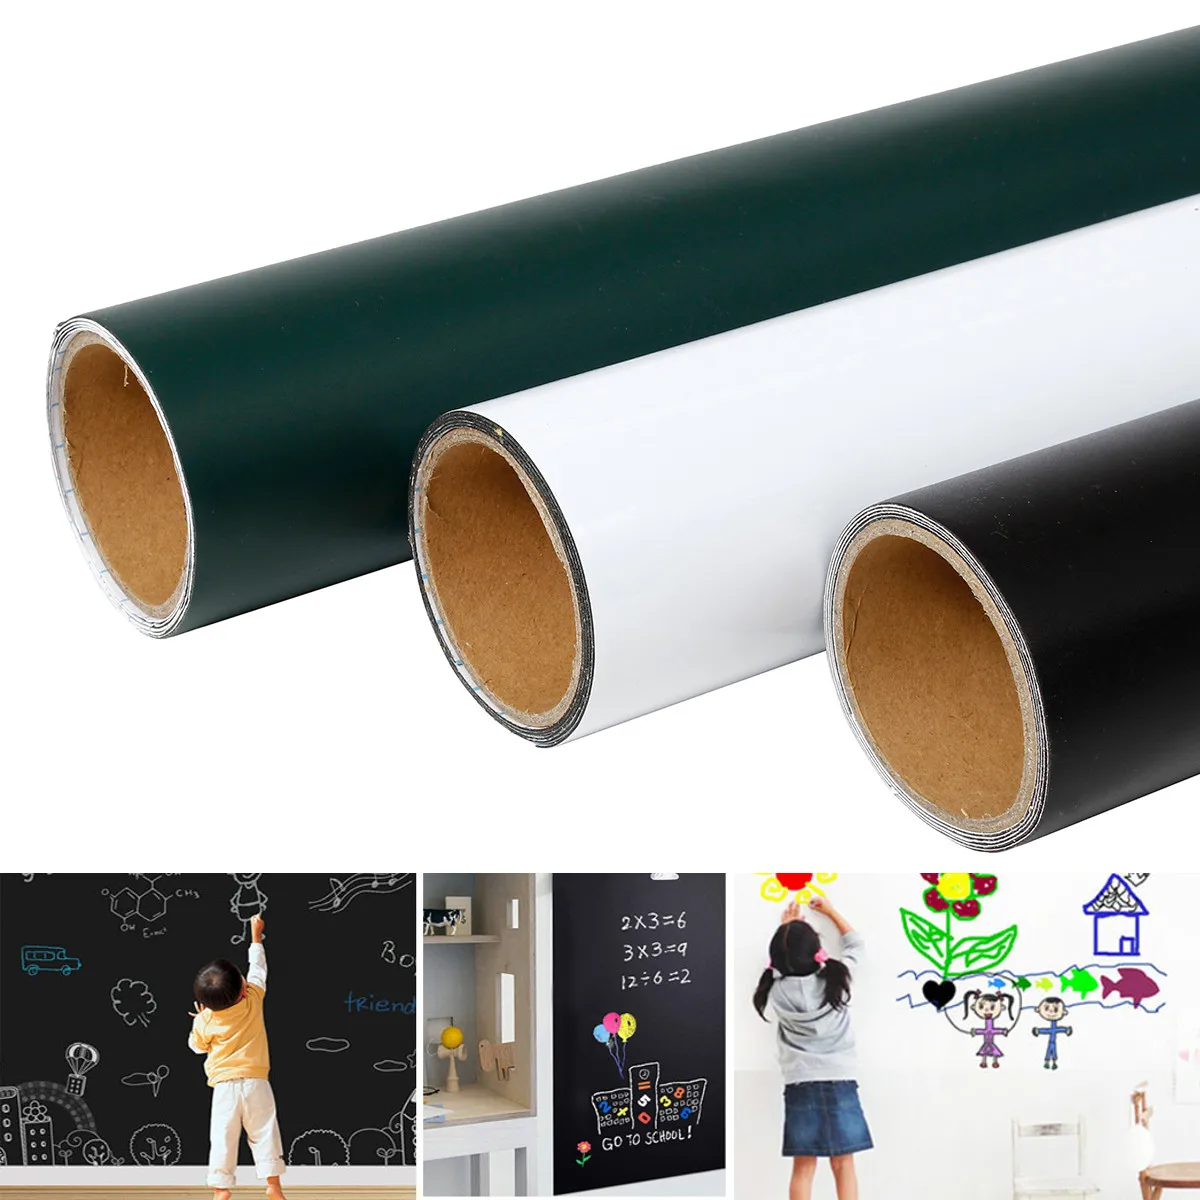 Bulk-buy Peel and Stick Dry Erase Magnetic Whiteboard Sticker Roll Adhesive Magnetic  White Board Contact Paper price comparison